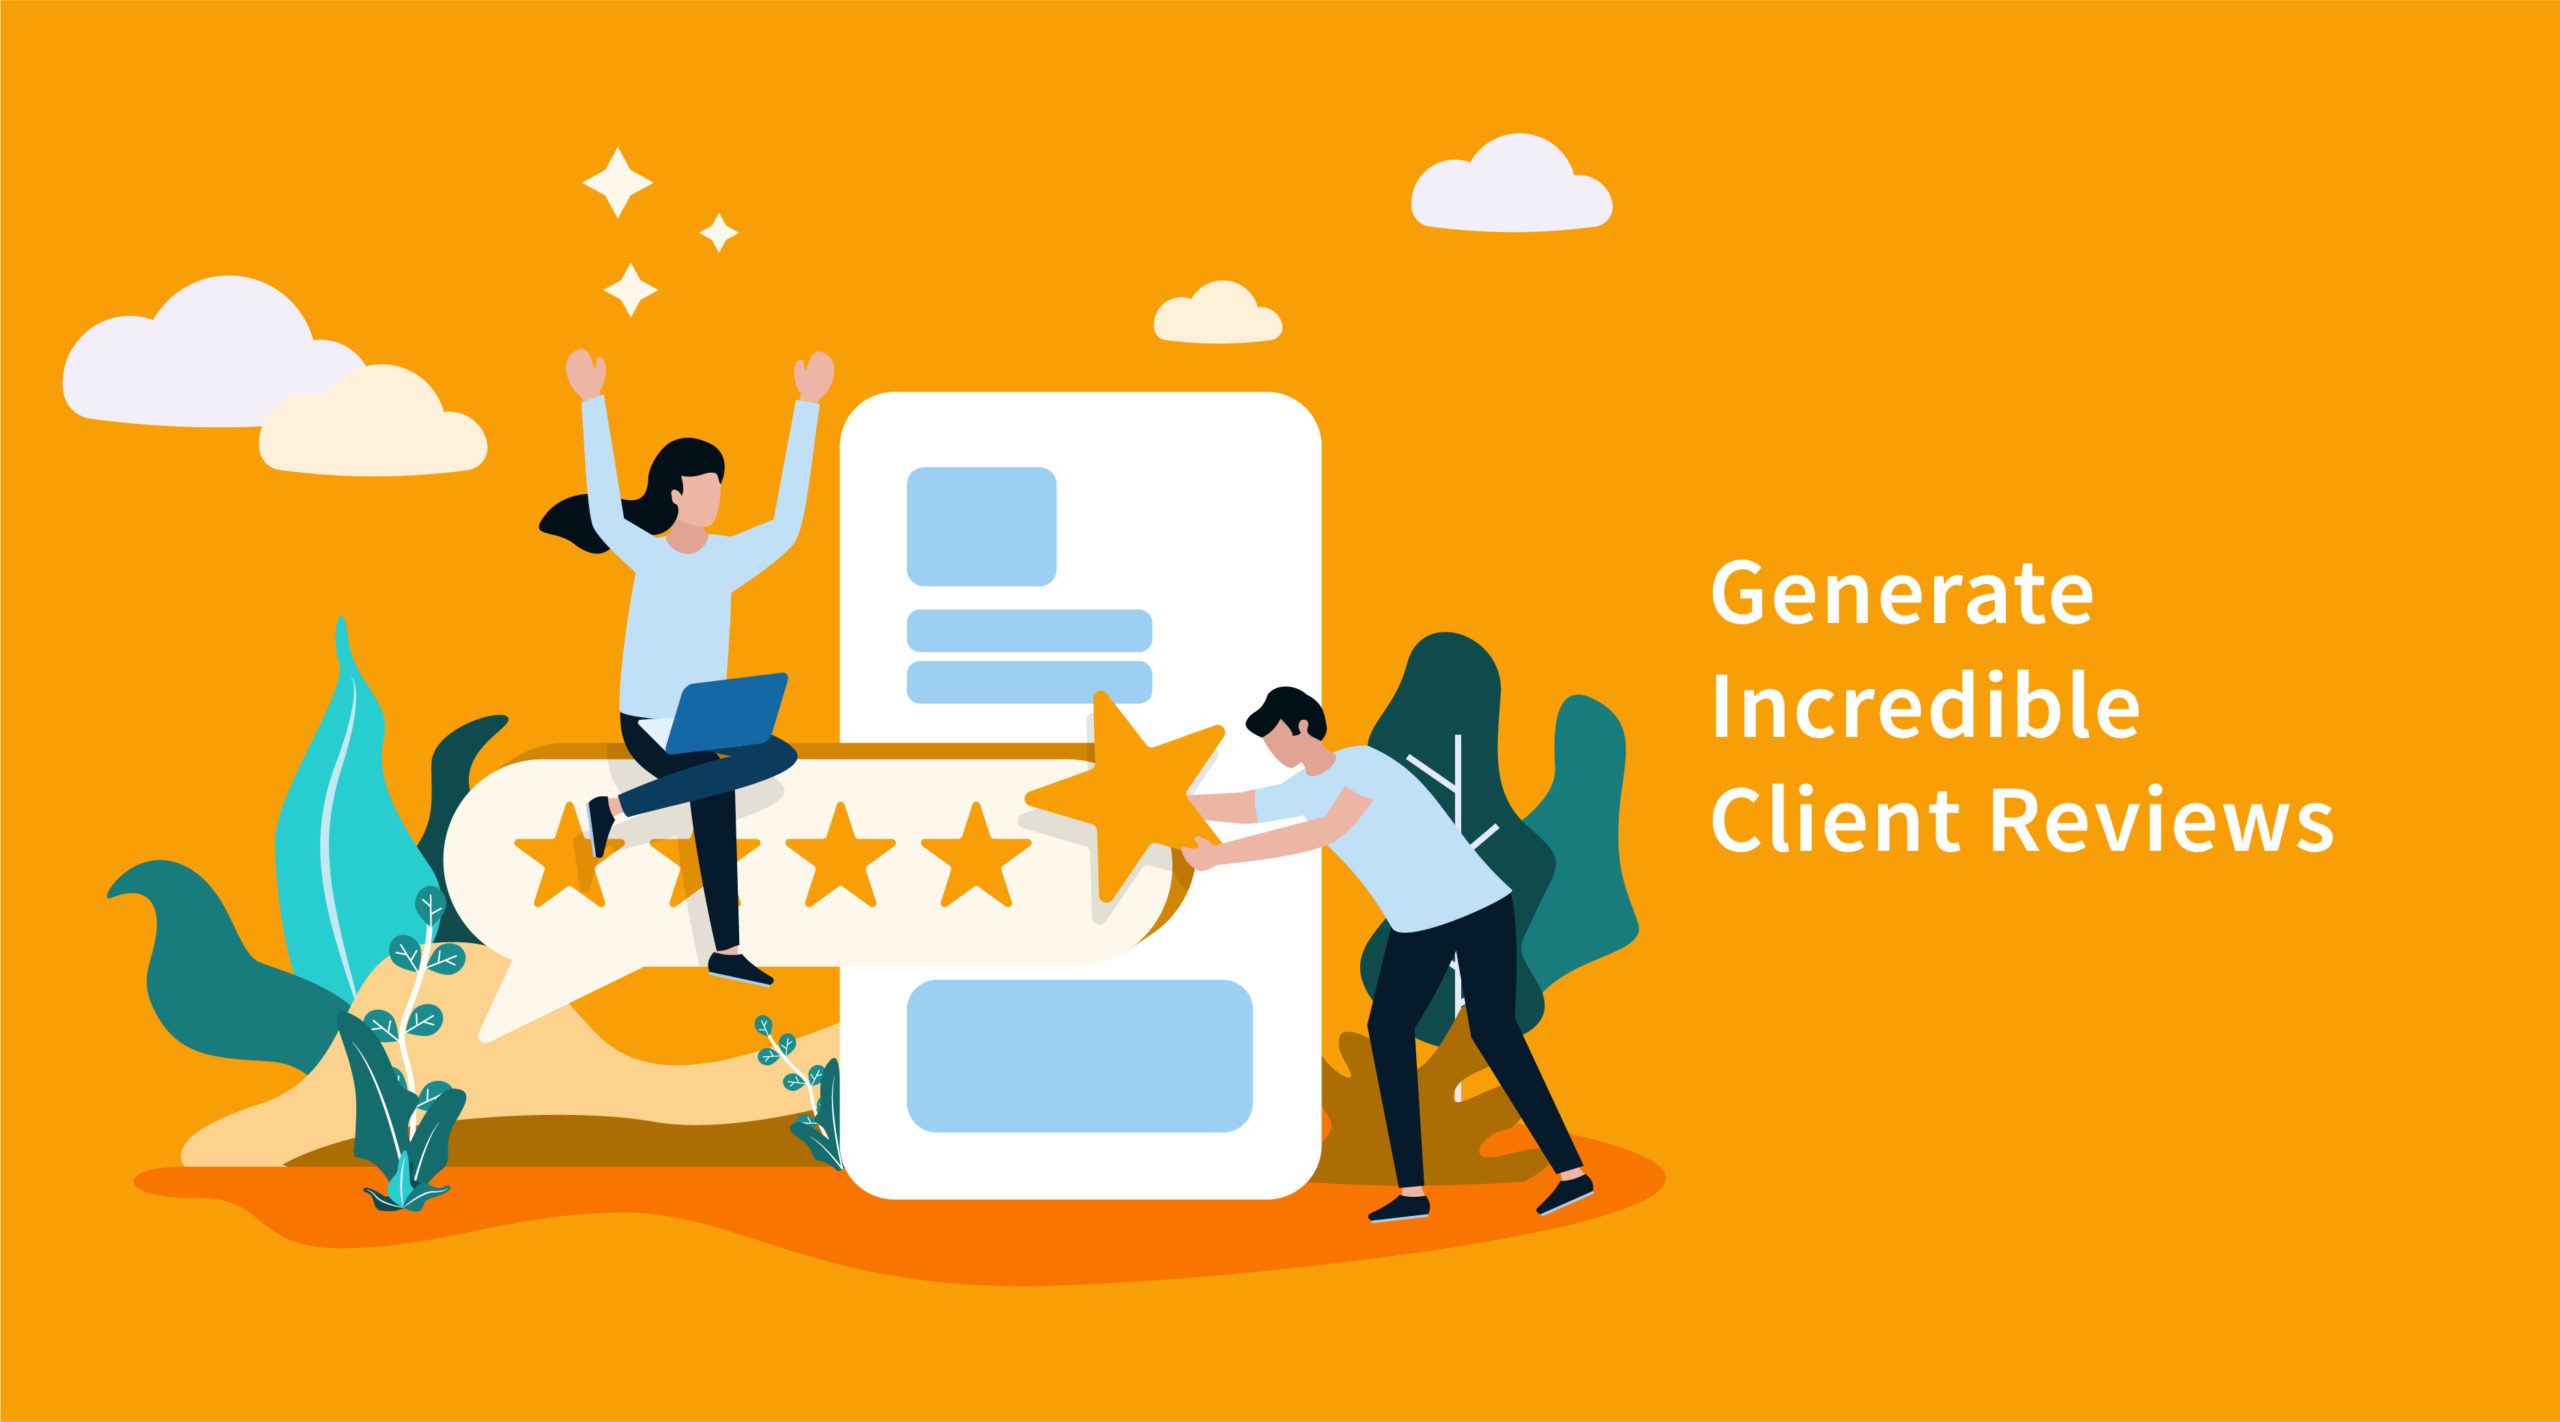 4 Ways to Generate Incredible Client Reviews